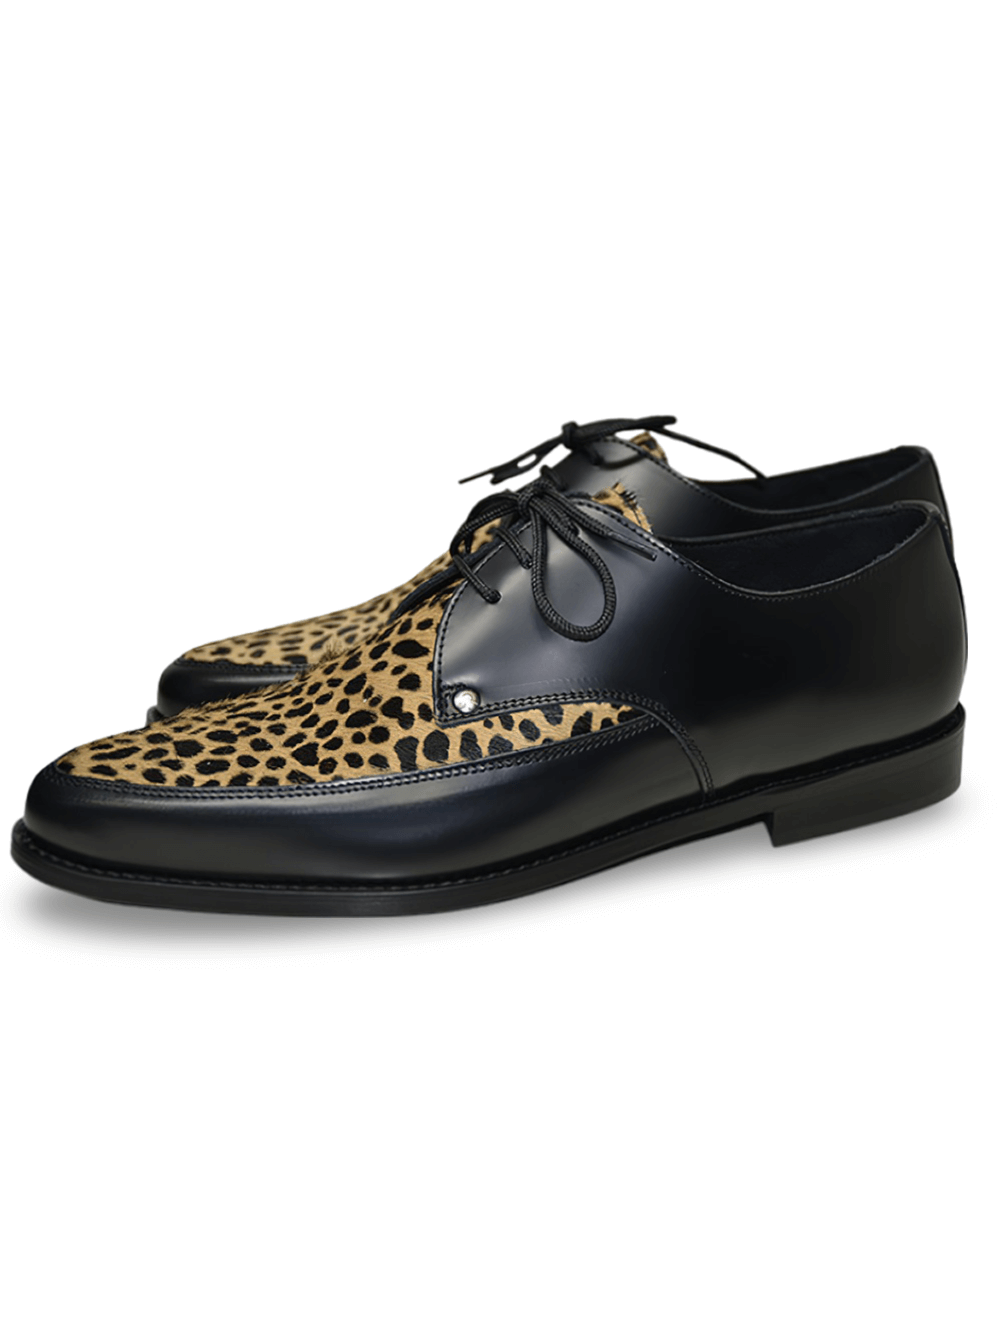 Leopard Print Oxford Shoes with Pointy Toe and Lace-Up